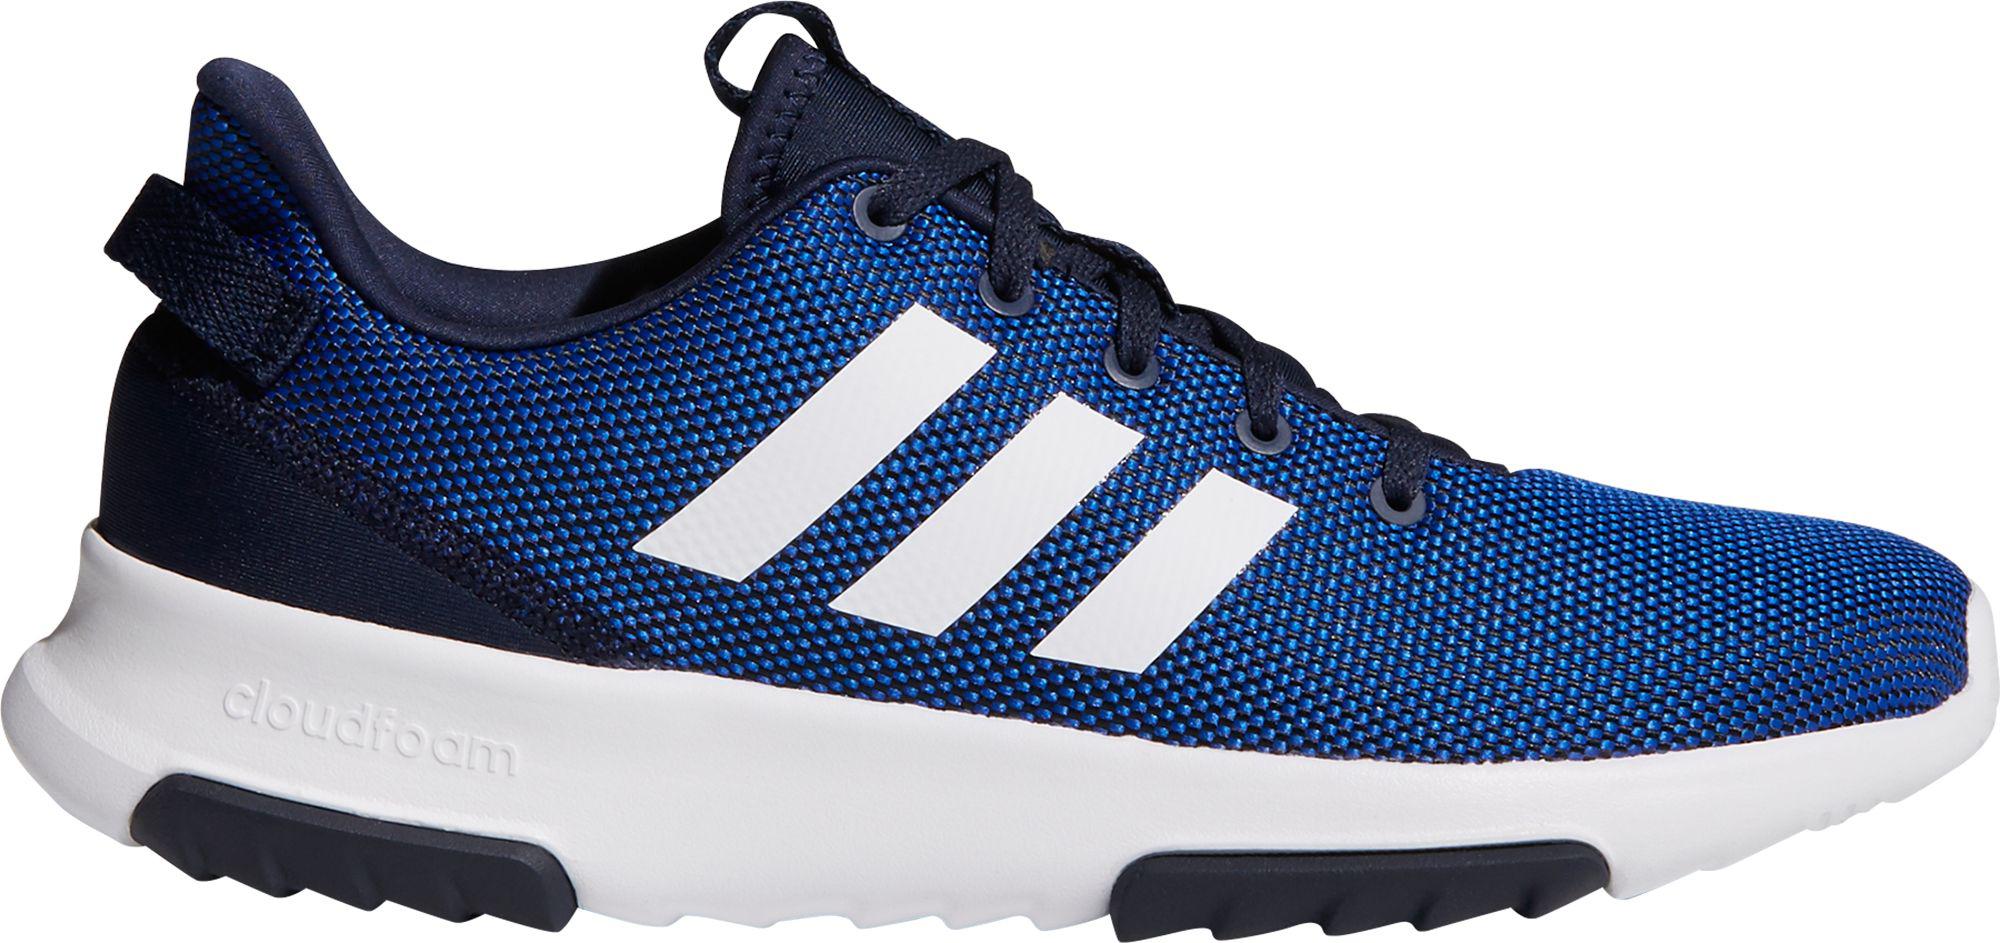 adidas Rubber Cf Racer Tr in Blue for Men - Save 45% - Lyst